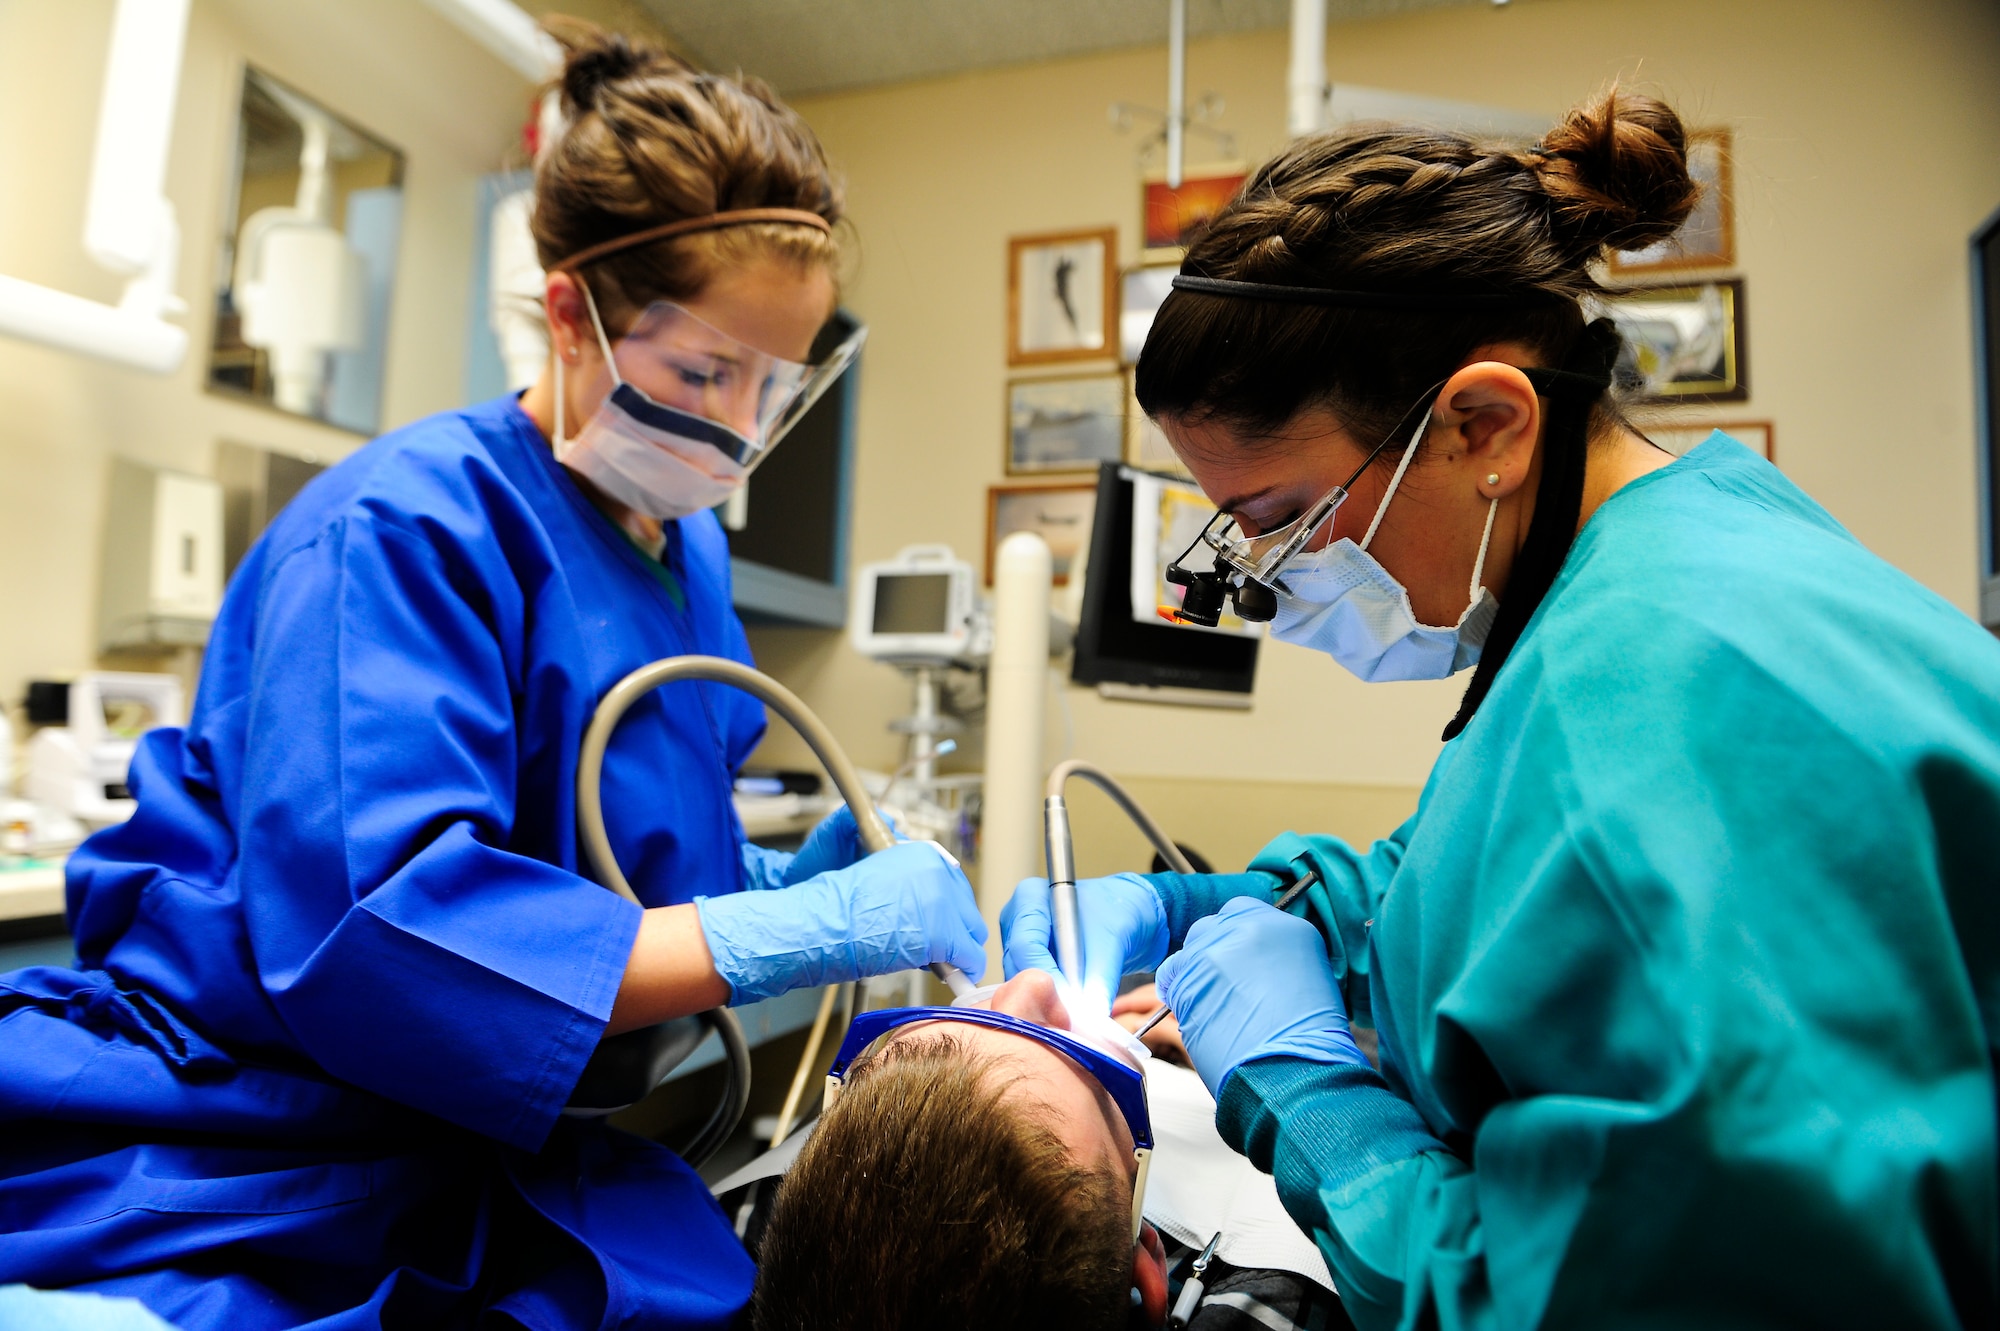 U.S. Air Force Capt. AnnMarie Moshos, a general dentist for 1st Special Operation Dental Squadron, and Airman 1st Class Misty Alcoriza, a dental assistant for 1st SODS, works on a patient at the Dental Clinic on Hurlburt Field, Fla., Feb. 20, 2013. If a dental issue is categorized as a class three-issue then that may hold you back from orders to deploy. (U.S. Air Force photo/Airman 1st Class Christopher Callaway) 